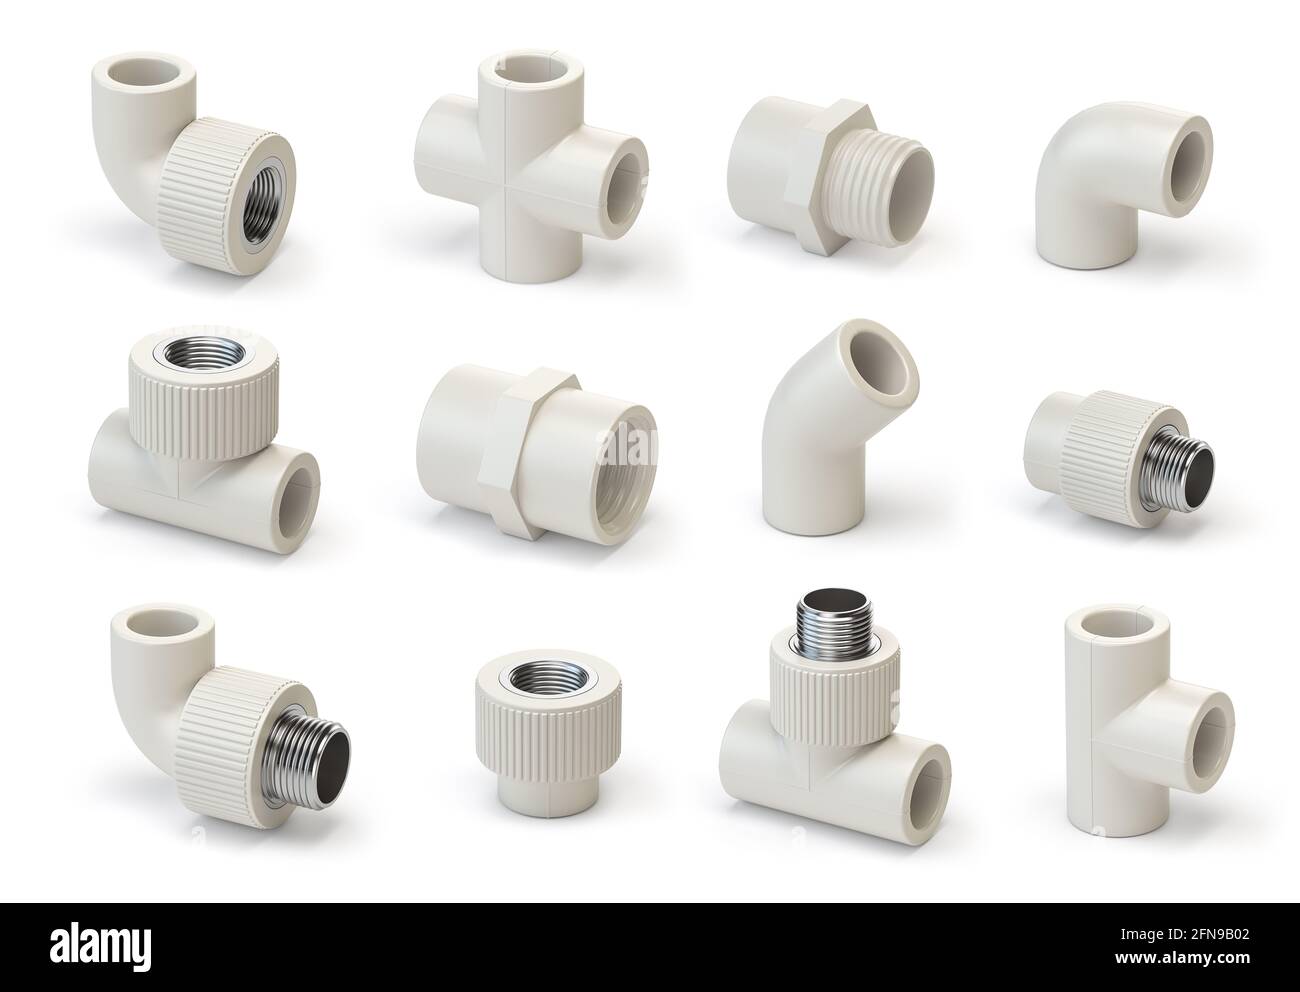 Set of PVC pipe fittings isolated on white. 3d illustration Stock Photo -  Alamy